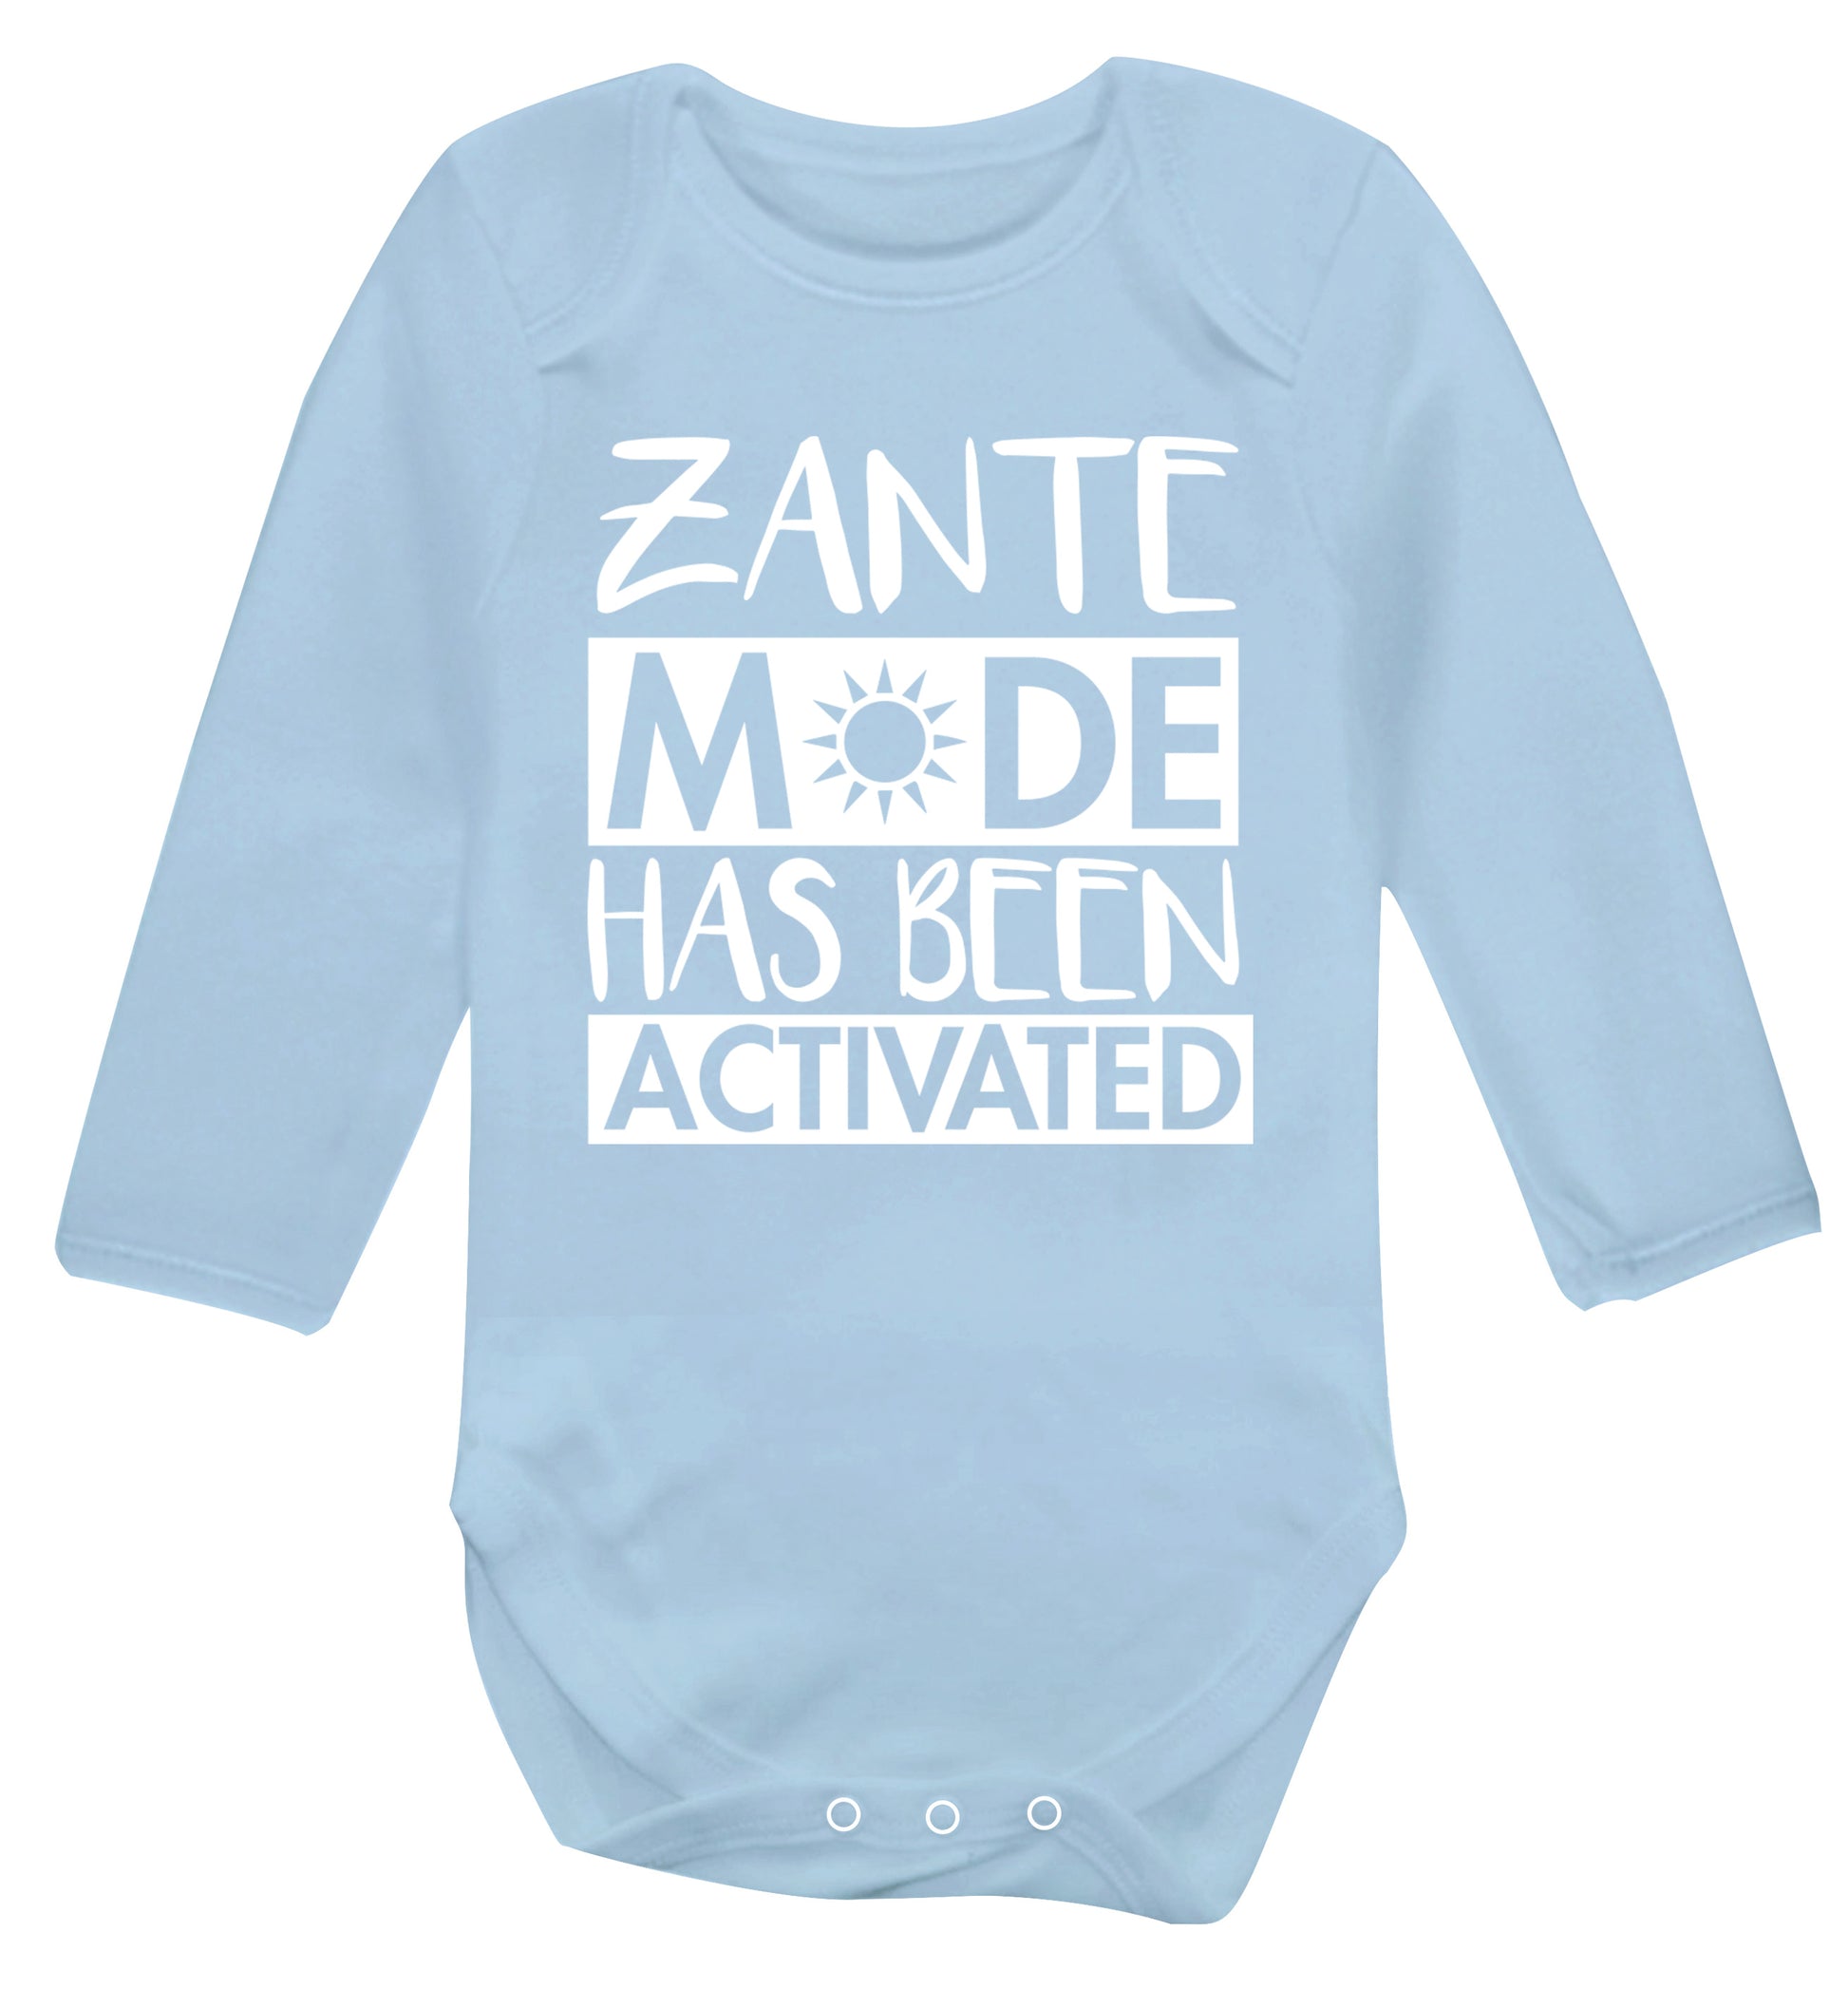 Zante mode has been activated Baby Vest long sleeved pale blue 6-12 months